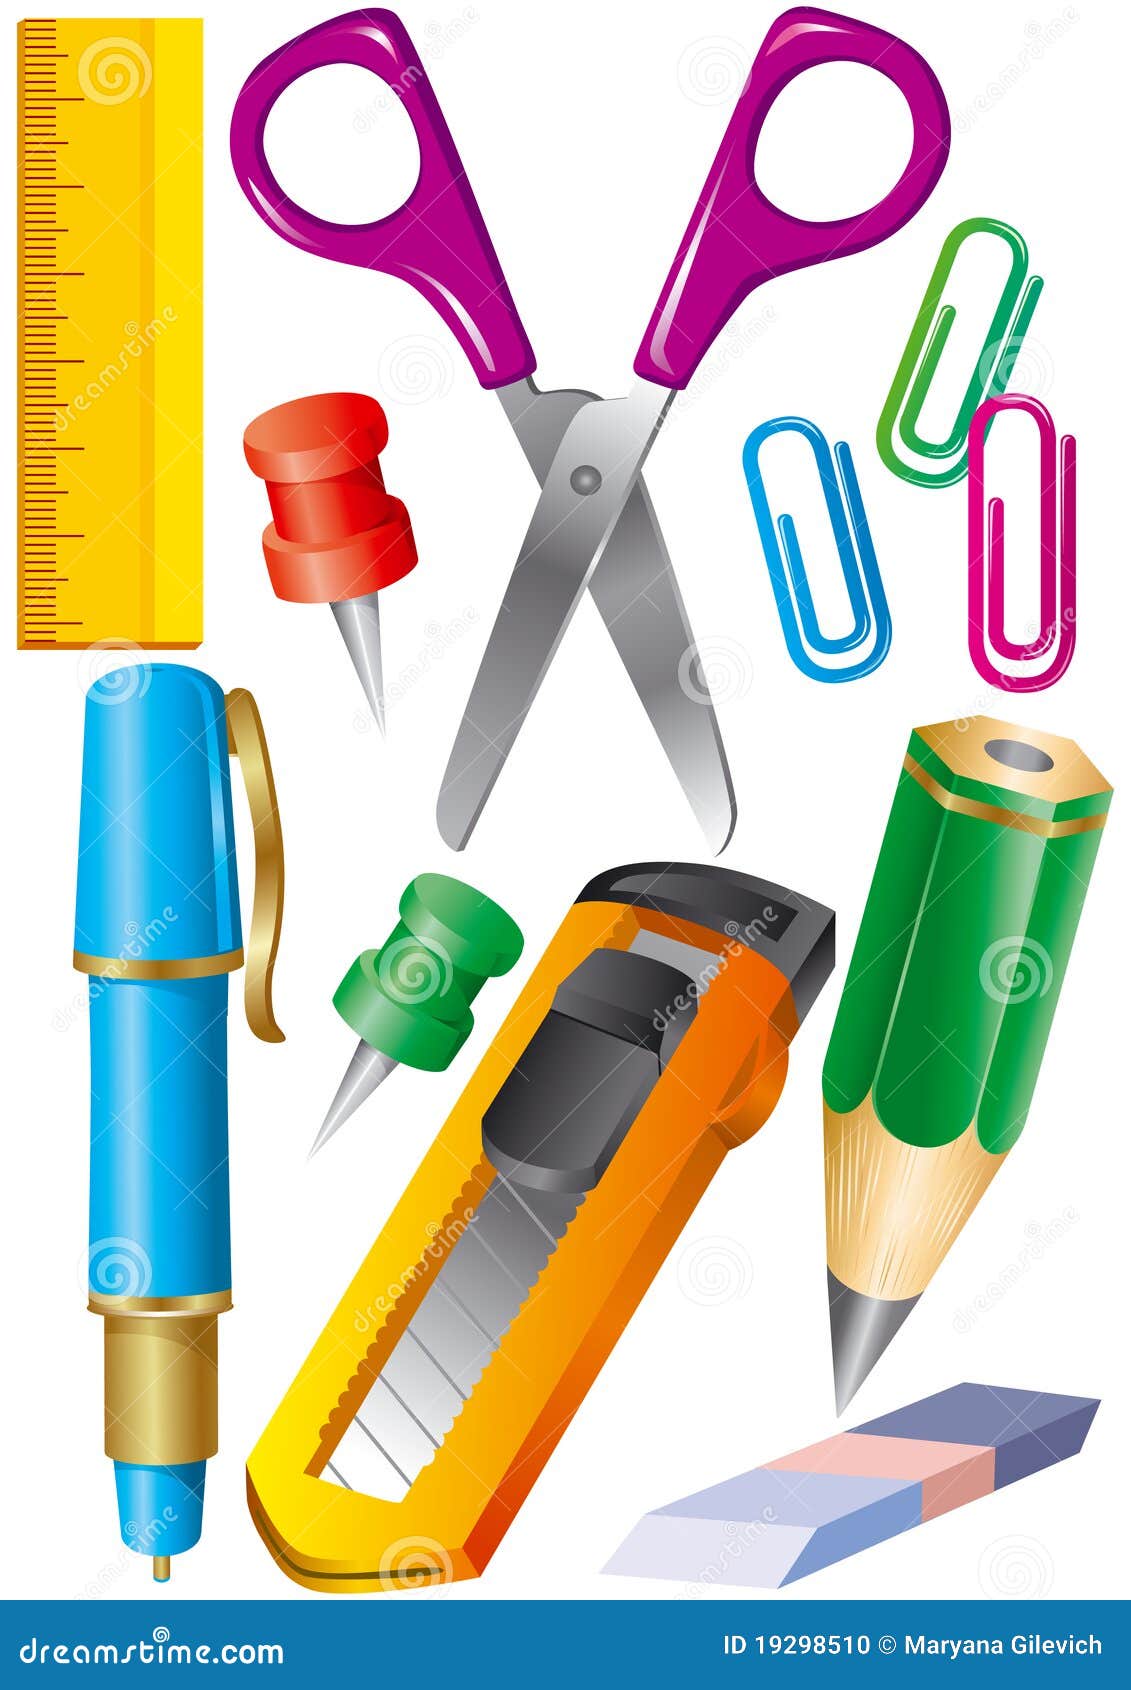 free office stationery clipart - photo #29